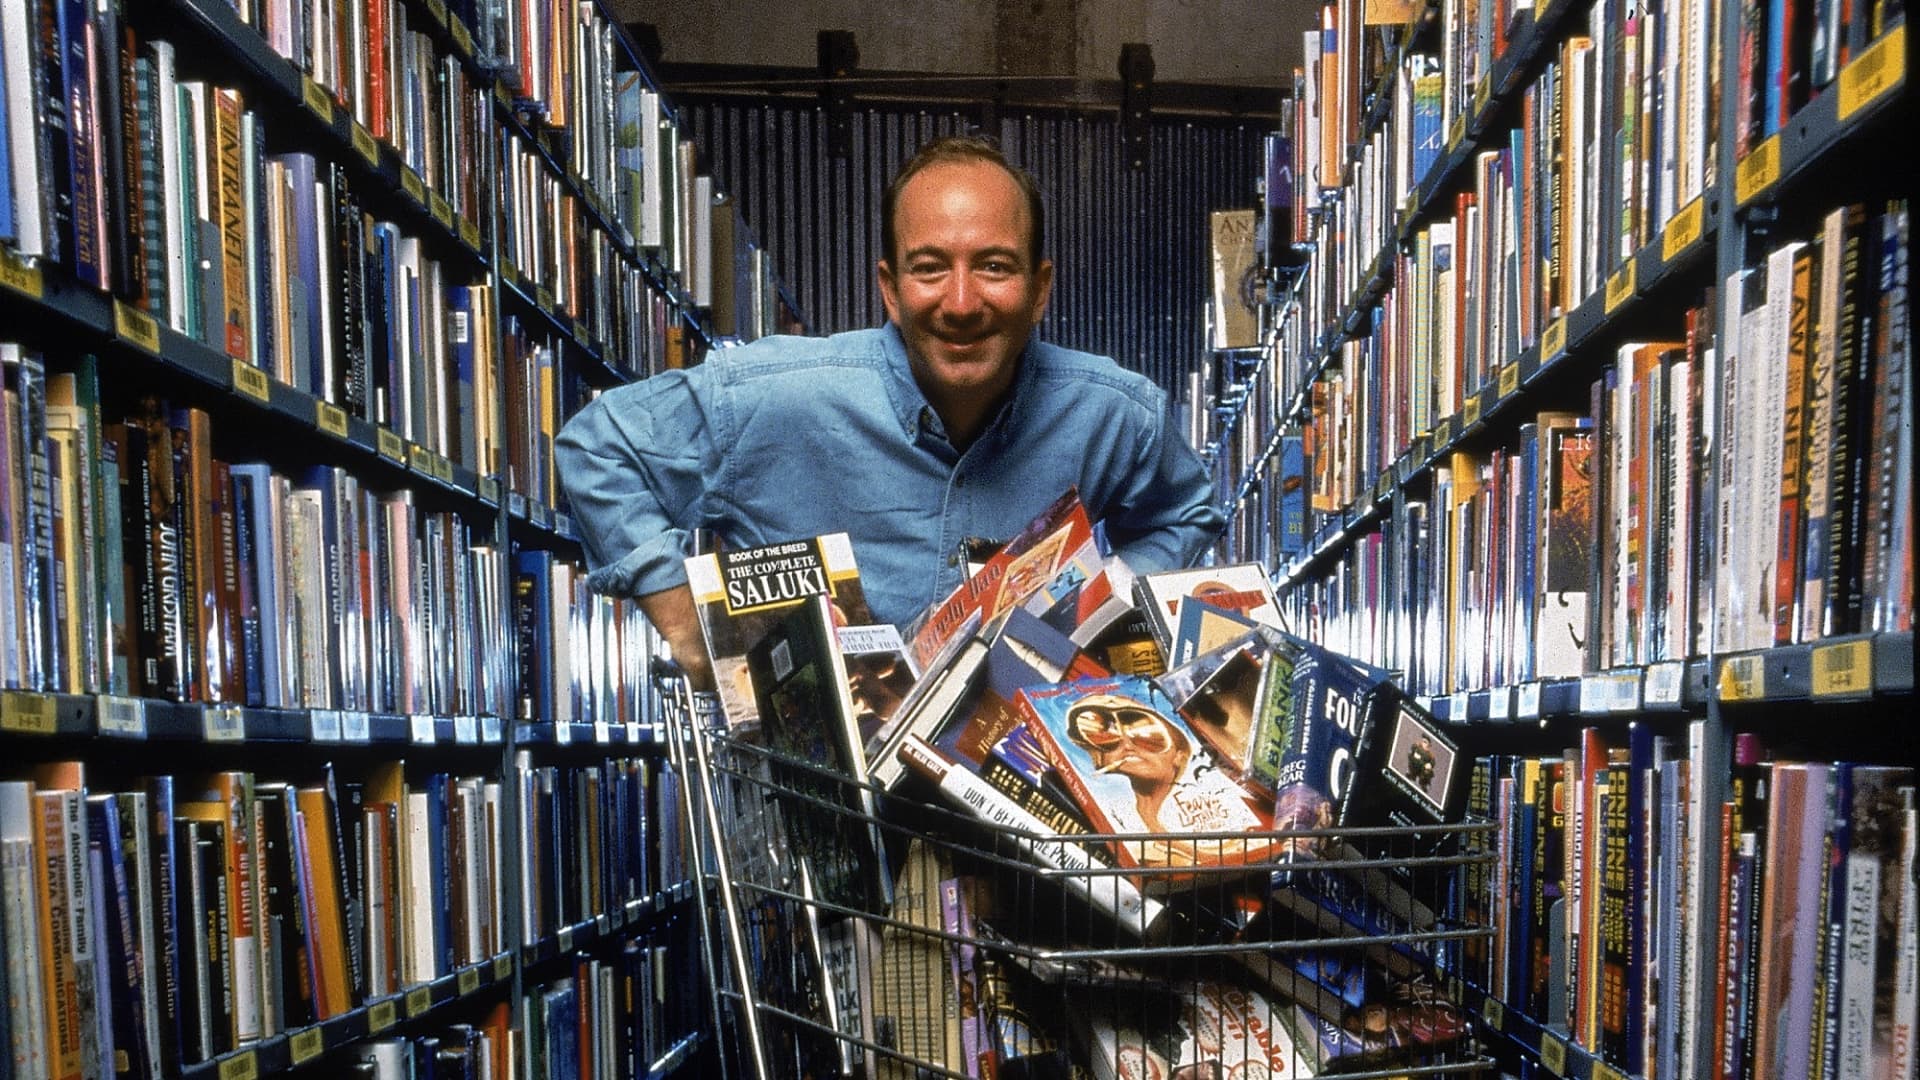 Portrait of American businessman and Amazon.com CEO Jeff Bezos poses in an aisle of bookshelves with a shopping cart full of books and compact discs, Seattle, Washington, September 1998.